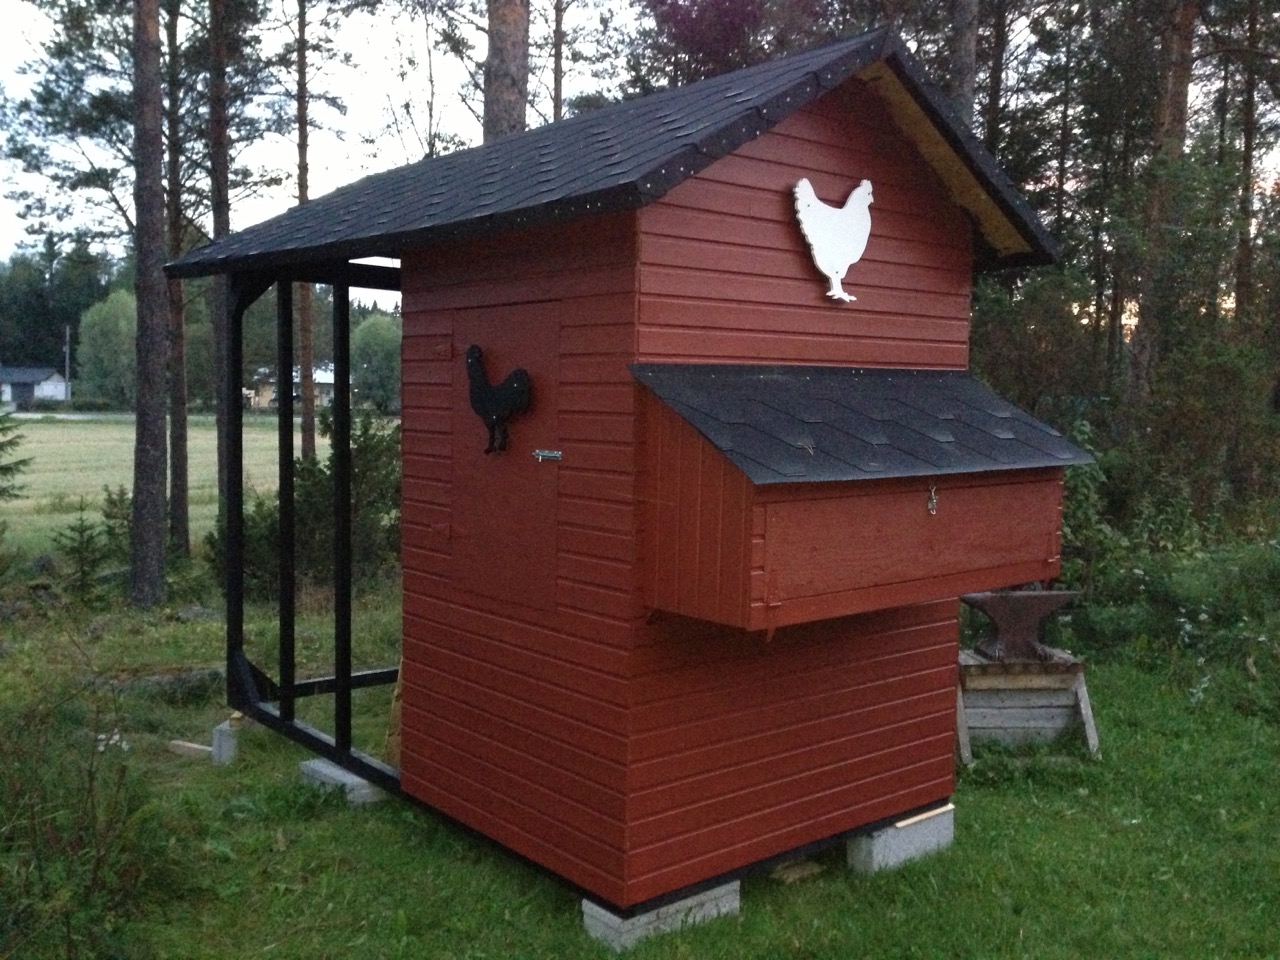 DIY Chicken Coop With Easy Access to Eggs